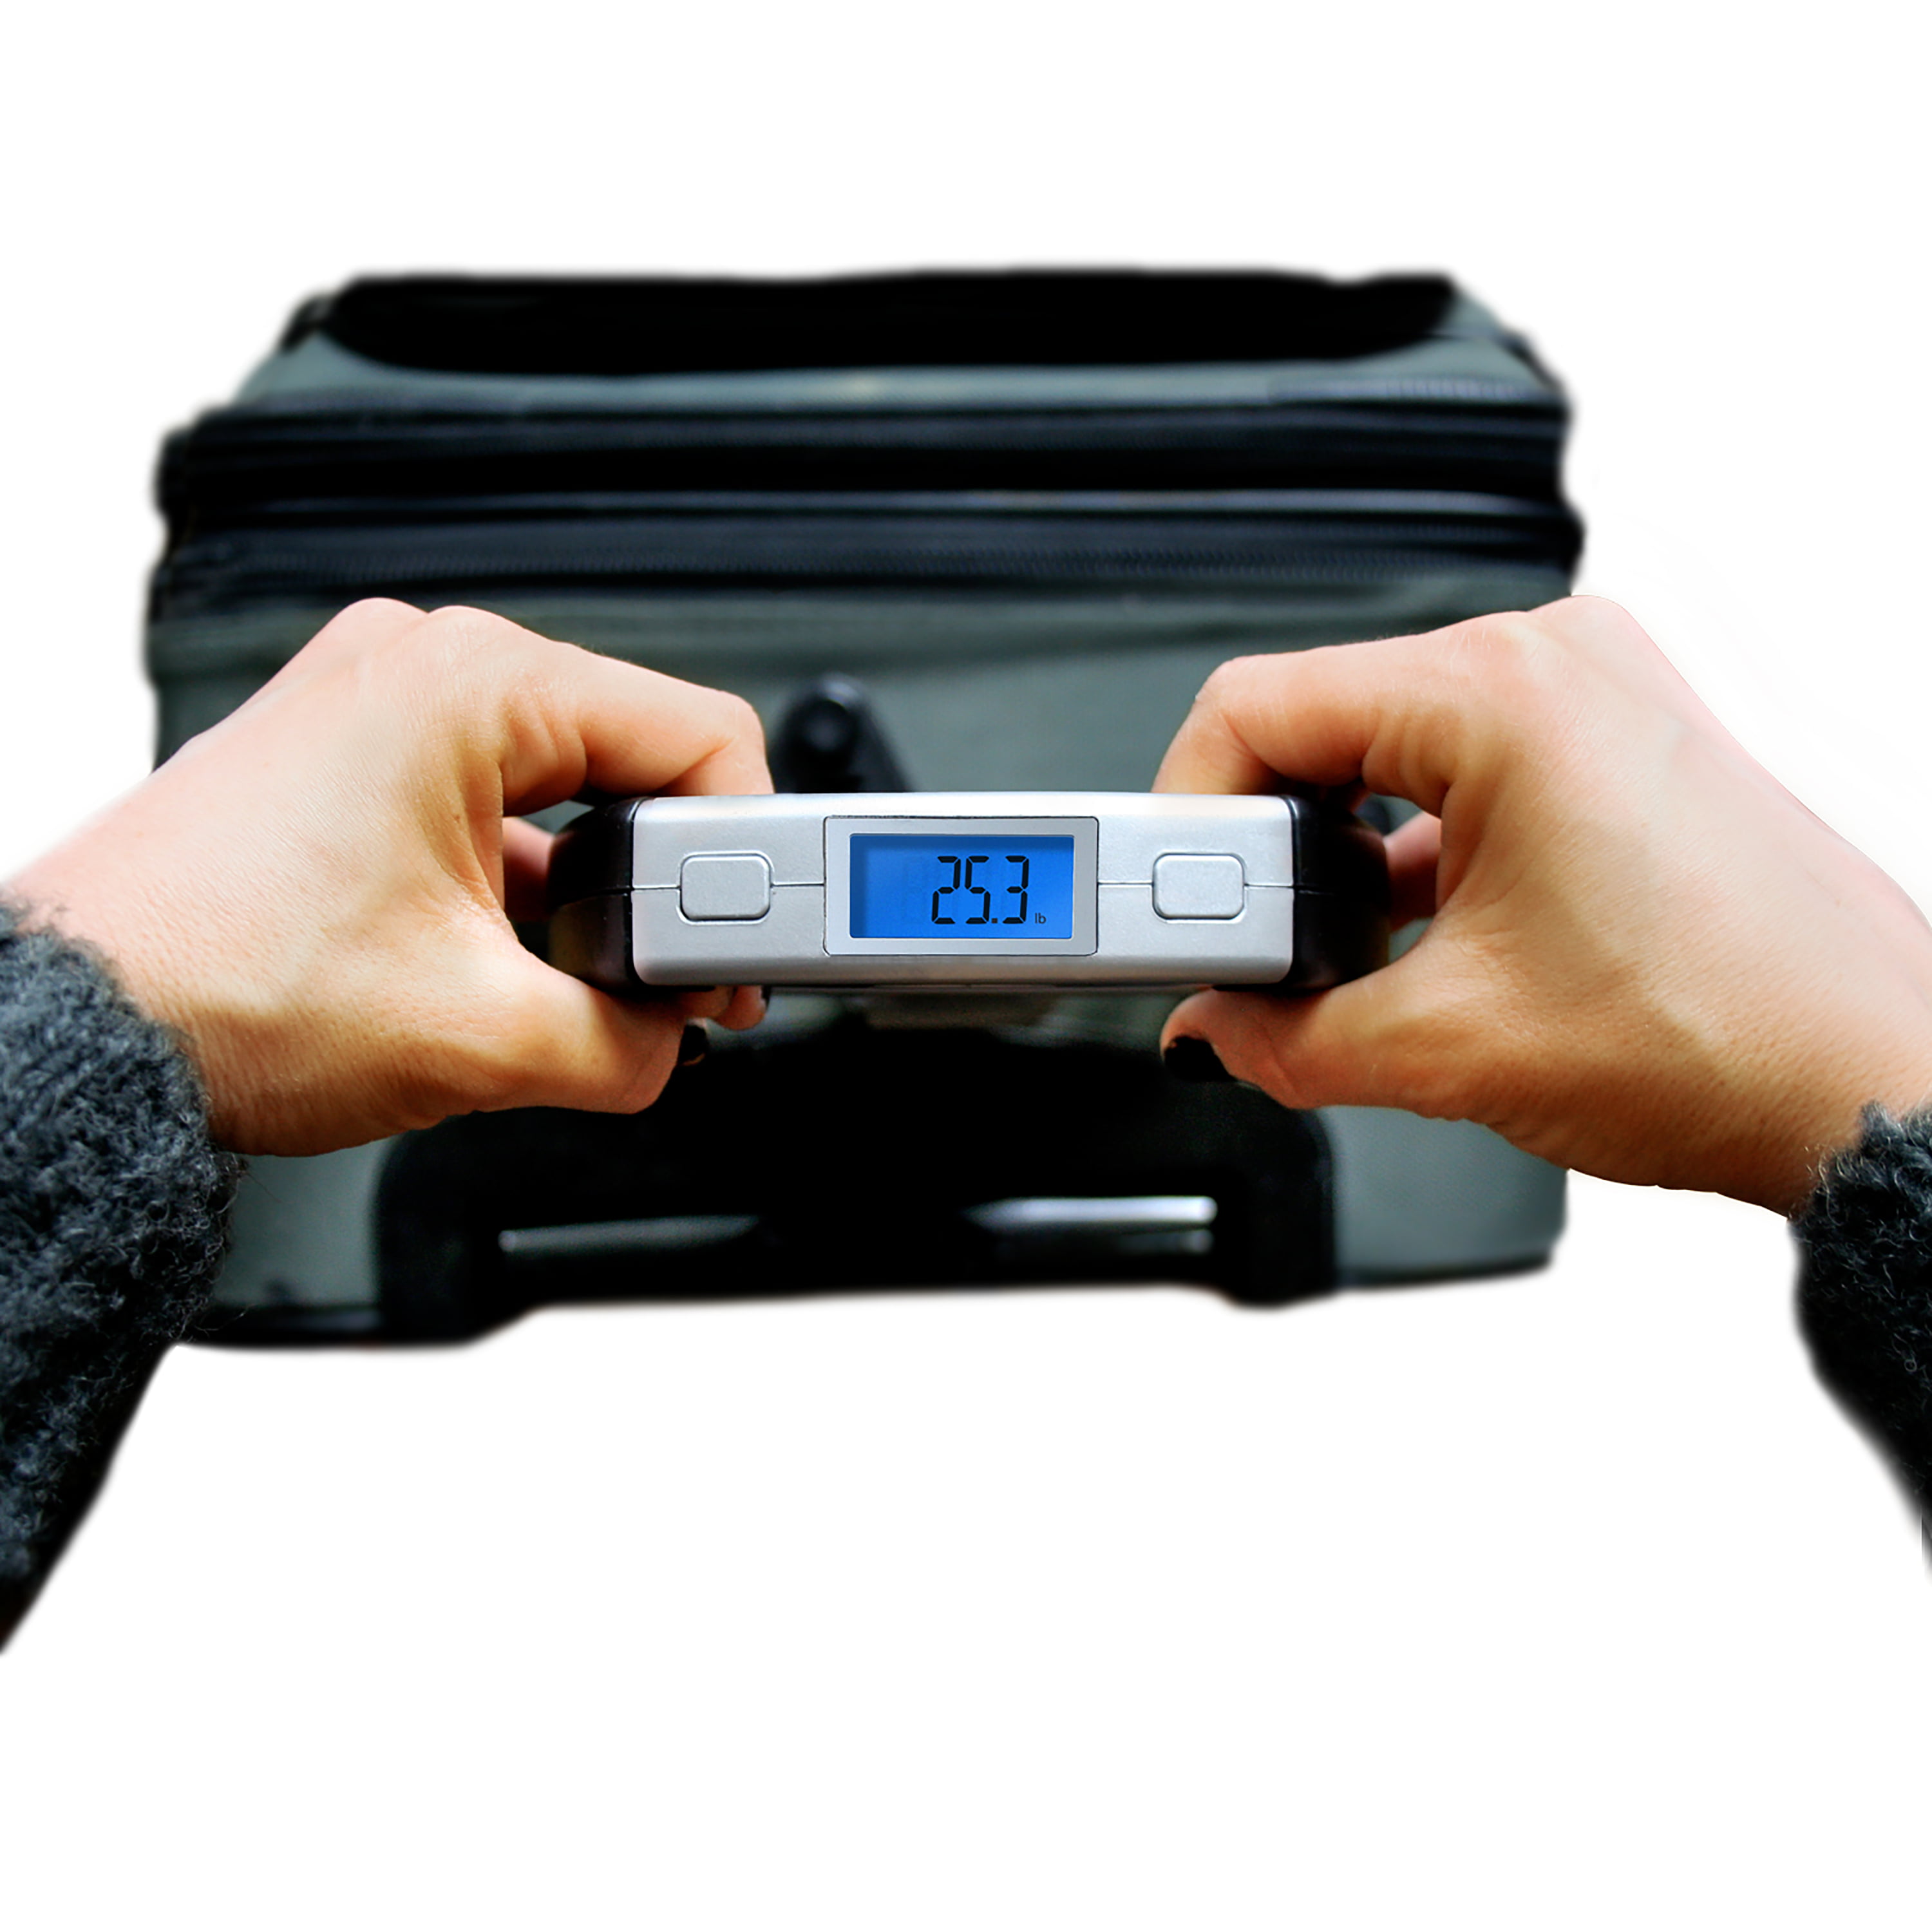 7 Reasons Every Business Traveler Needs a Luggage Scale – Eat Smart